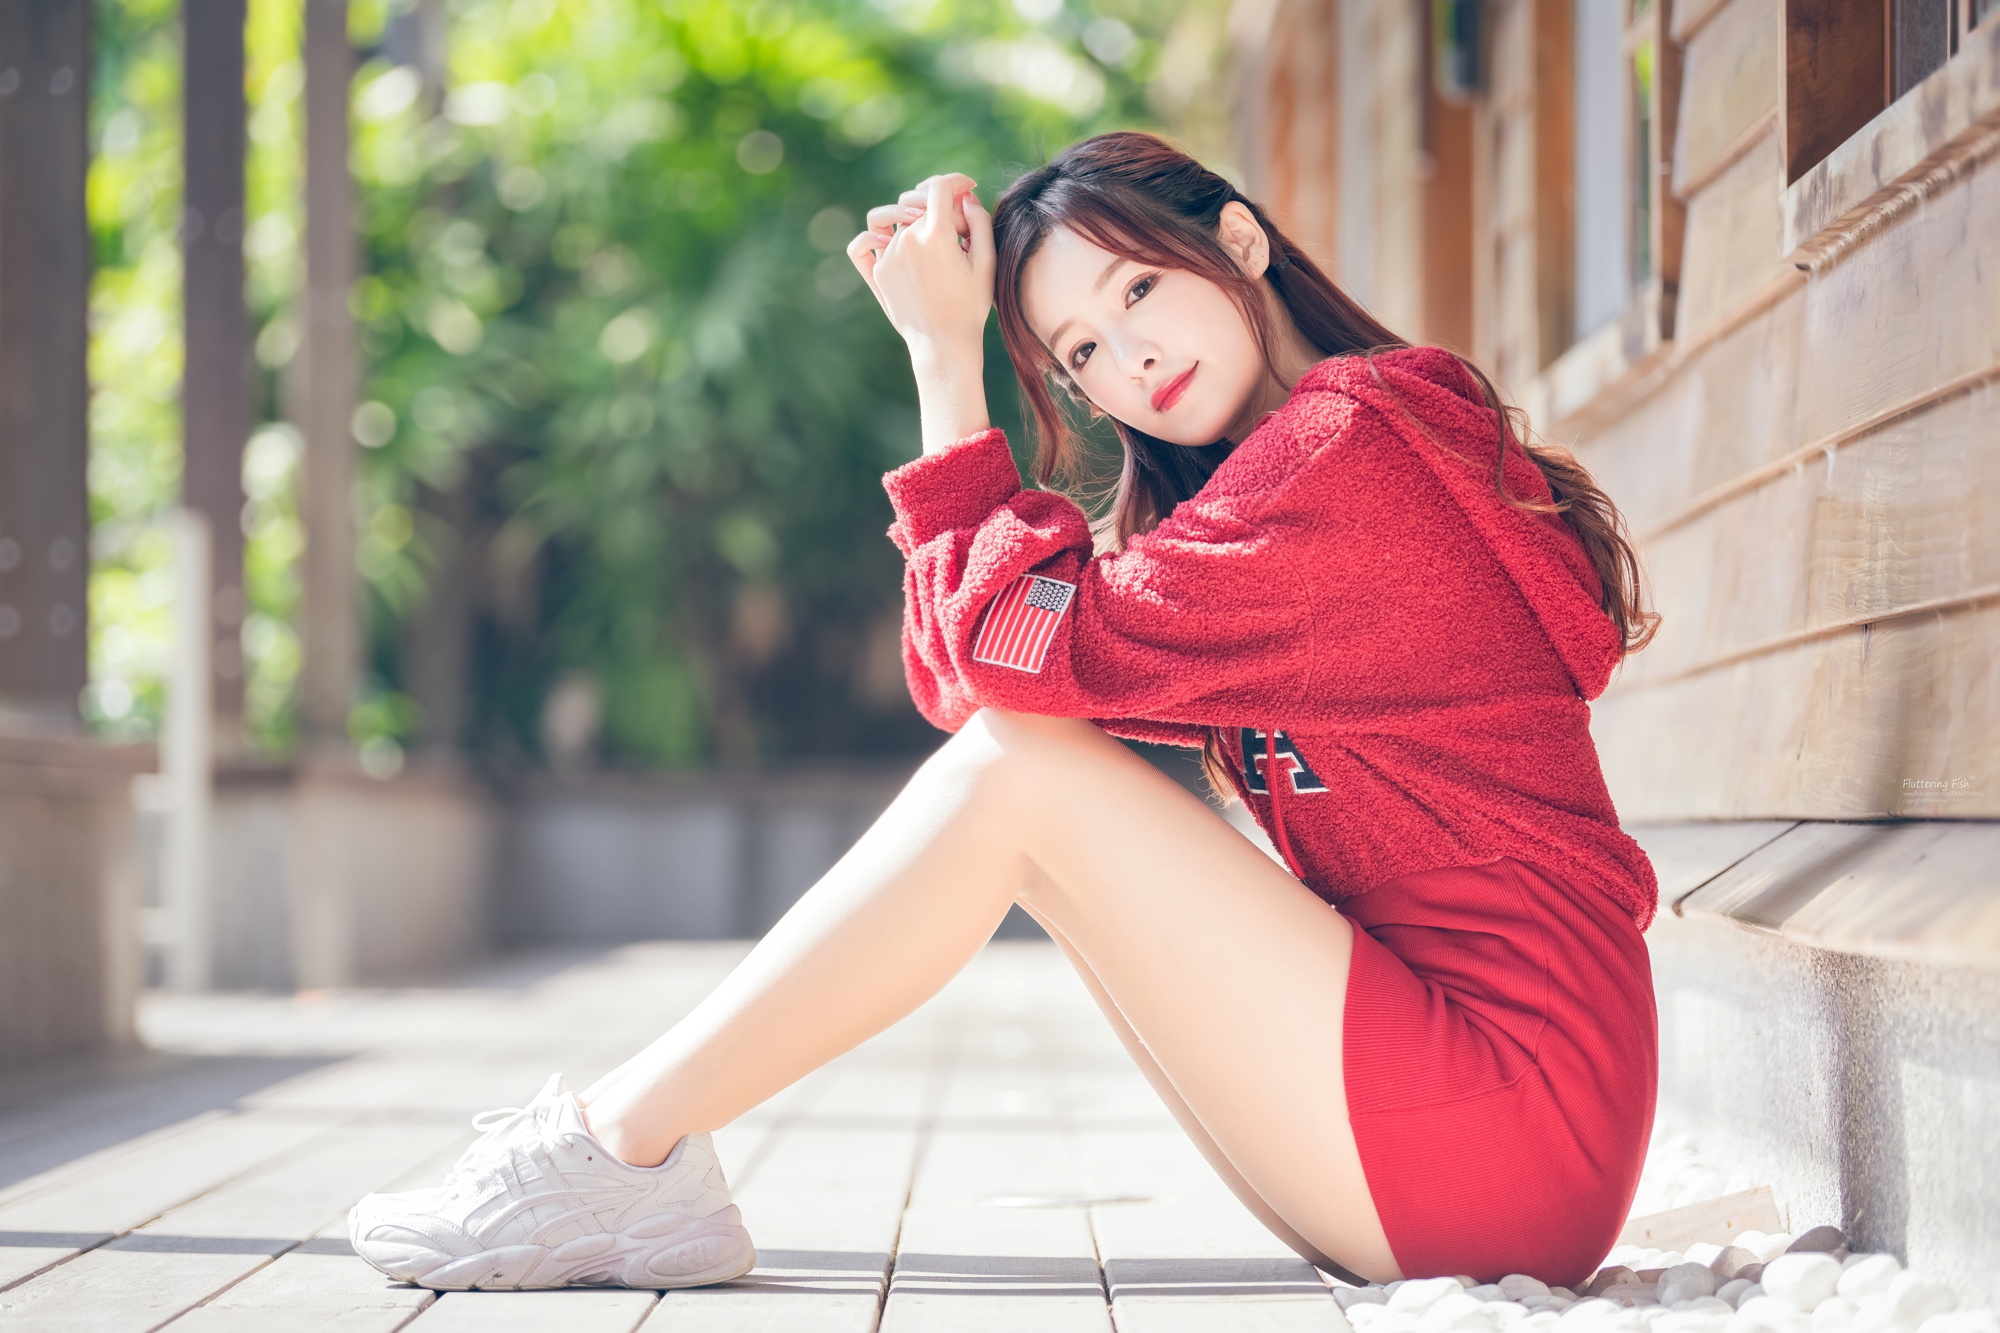 People 2000x1333 Asian model women long hair dark hair sitting depth of field plants sneakers red dress legs skirt on the ground red clothing